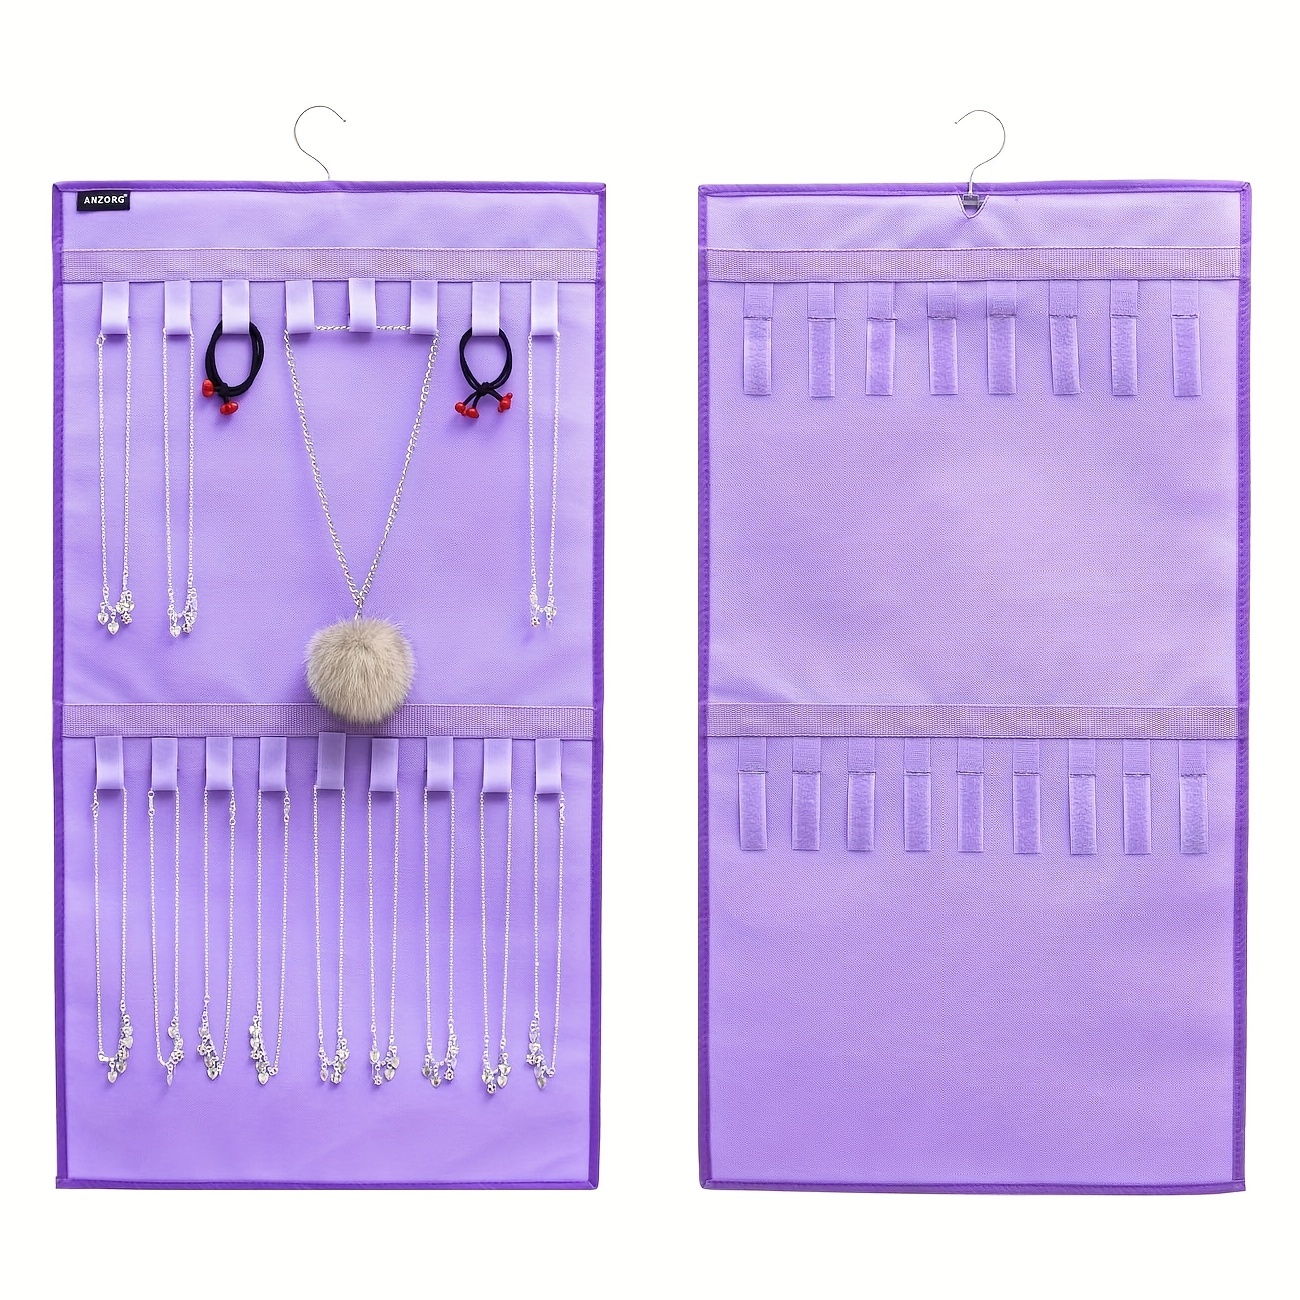 ANZORG Dual Sided Hanging Organizer for Jewelry Makeup Storage